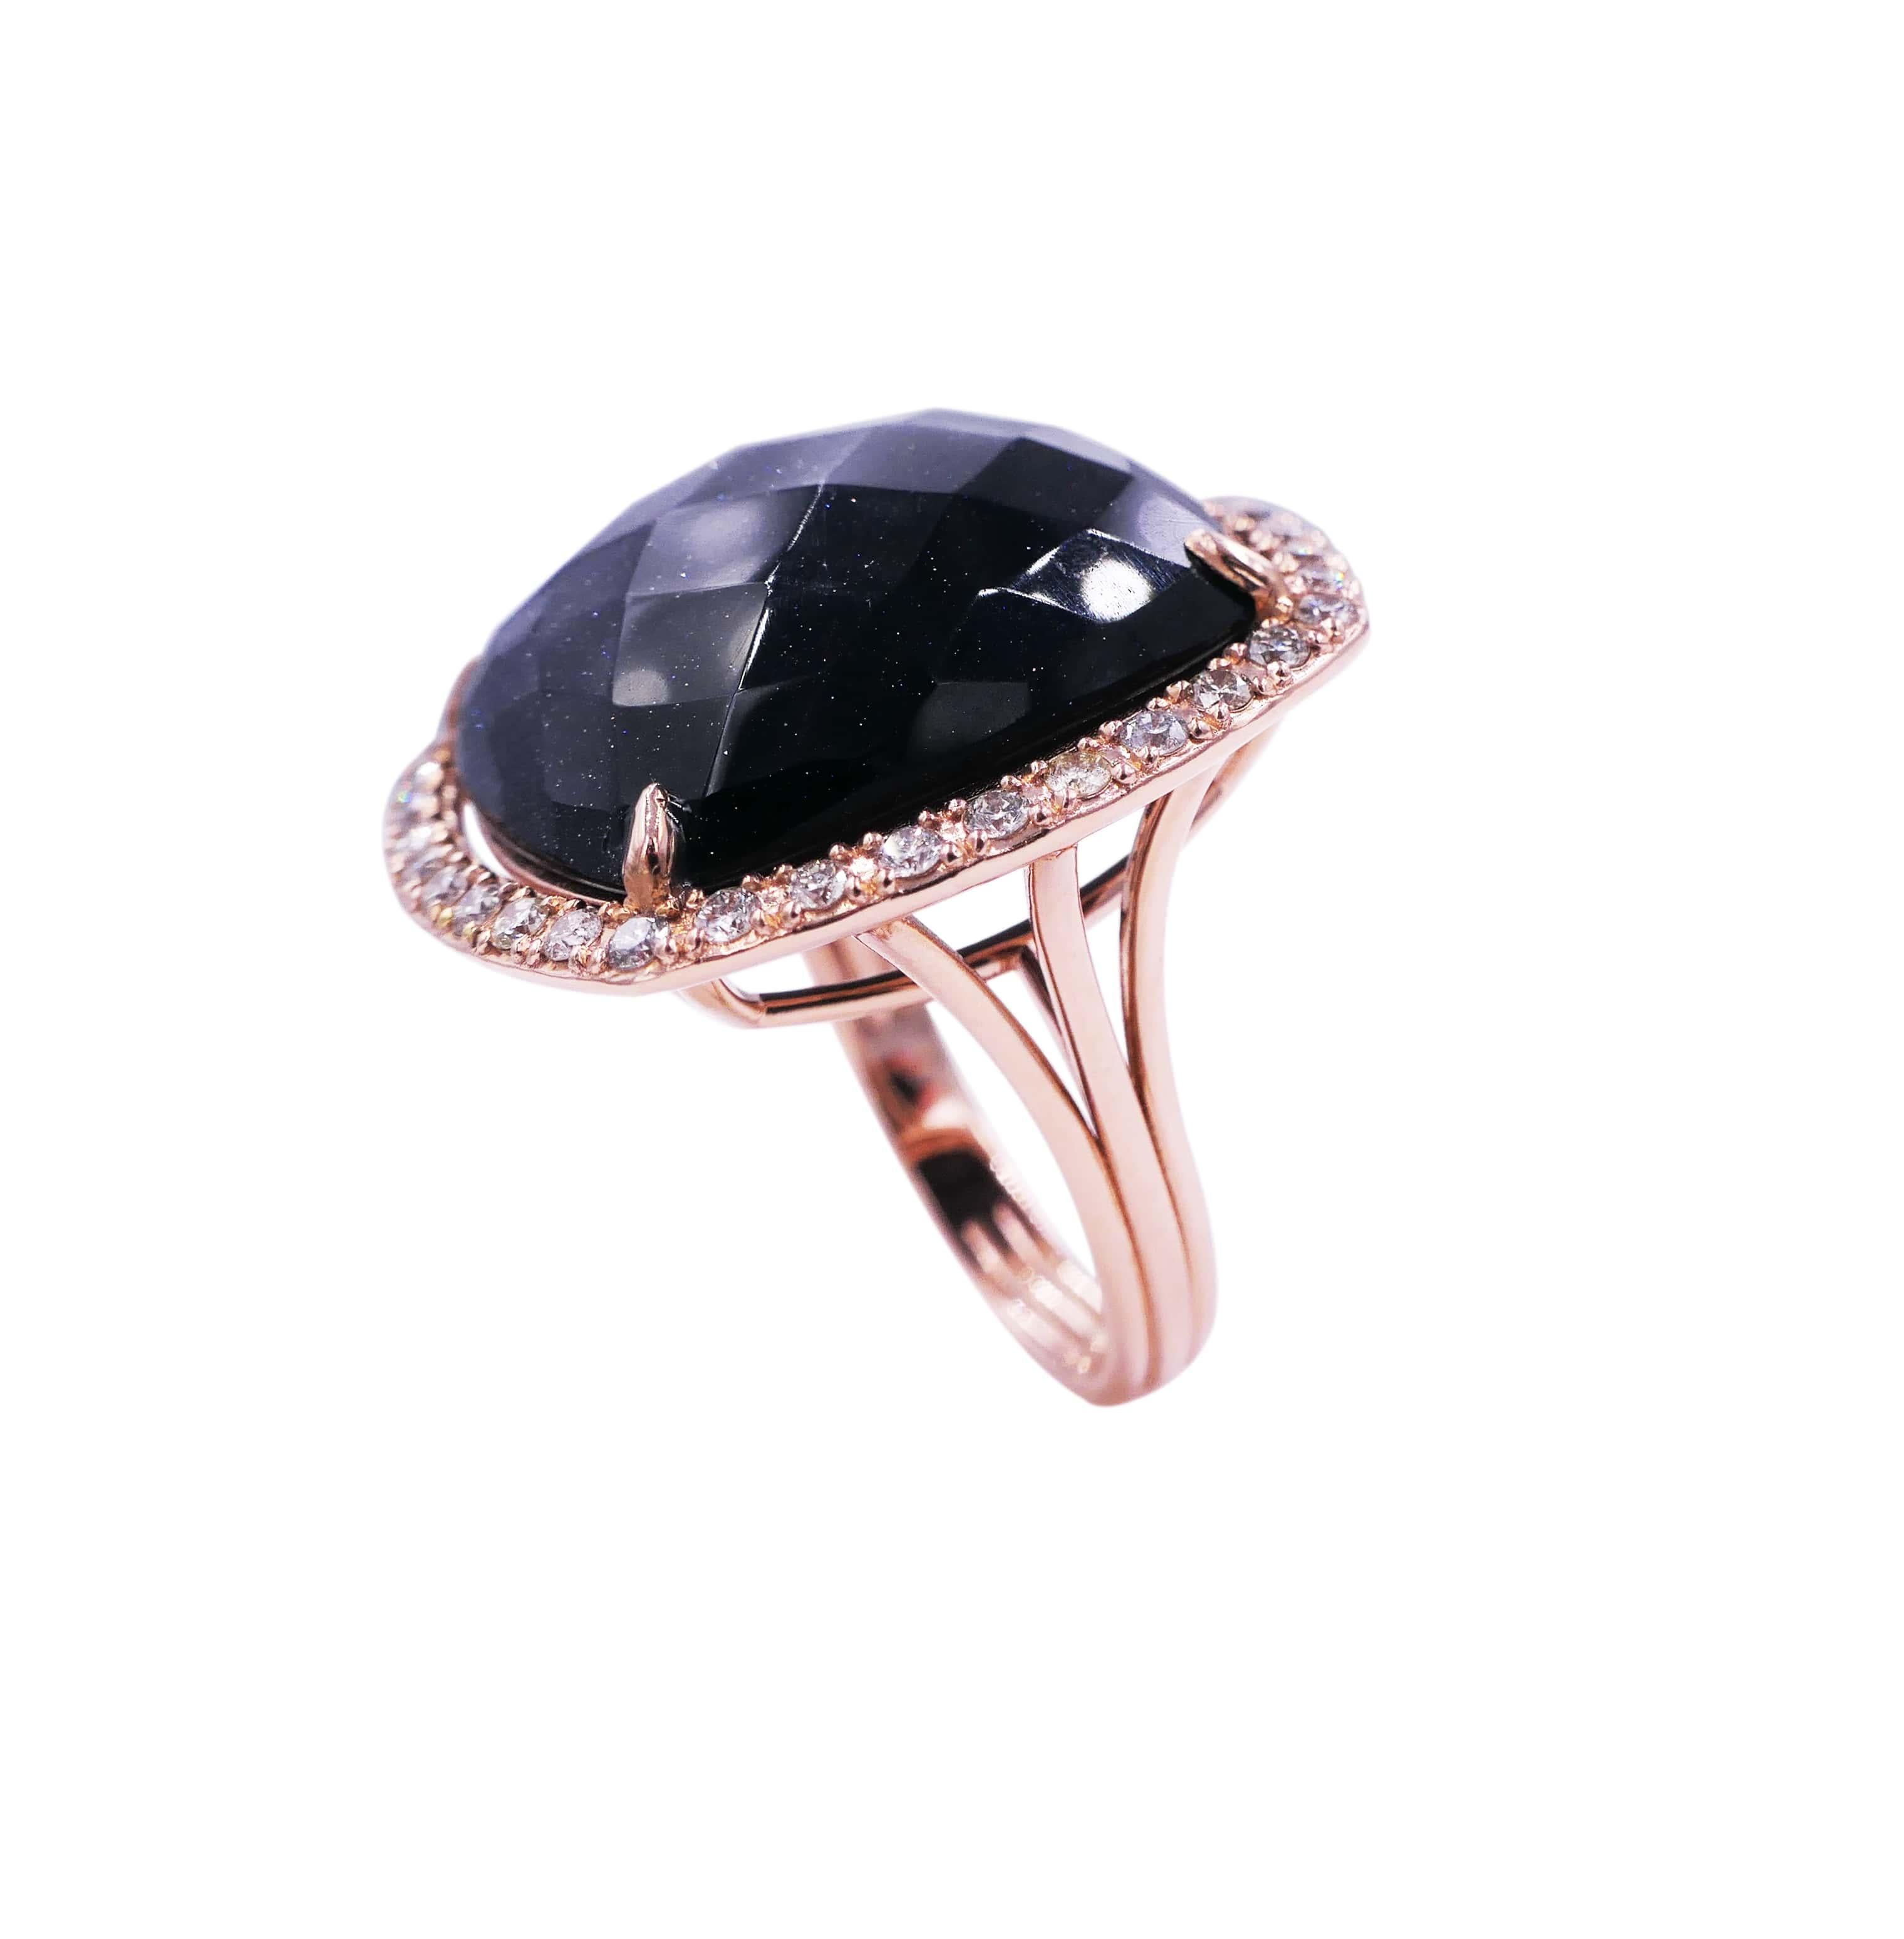 Black Aventurine Cushion Cabochon Diamonds 14 Karat Rose Gold Halo Ring
14 Karat Rose Gold
Black Aventurine Cushion Cabochon Gemstones
0.15 cts Diamonds
Size 7, Resizable upon request 

Important Information:
Please note that this item will take 2-4